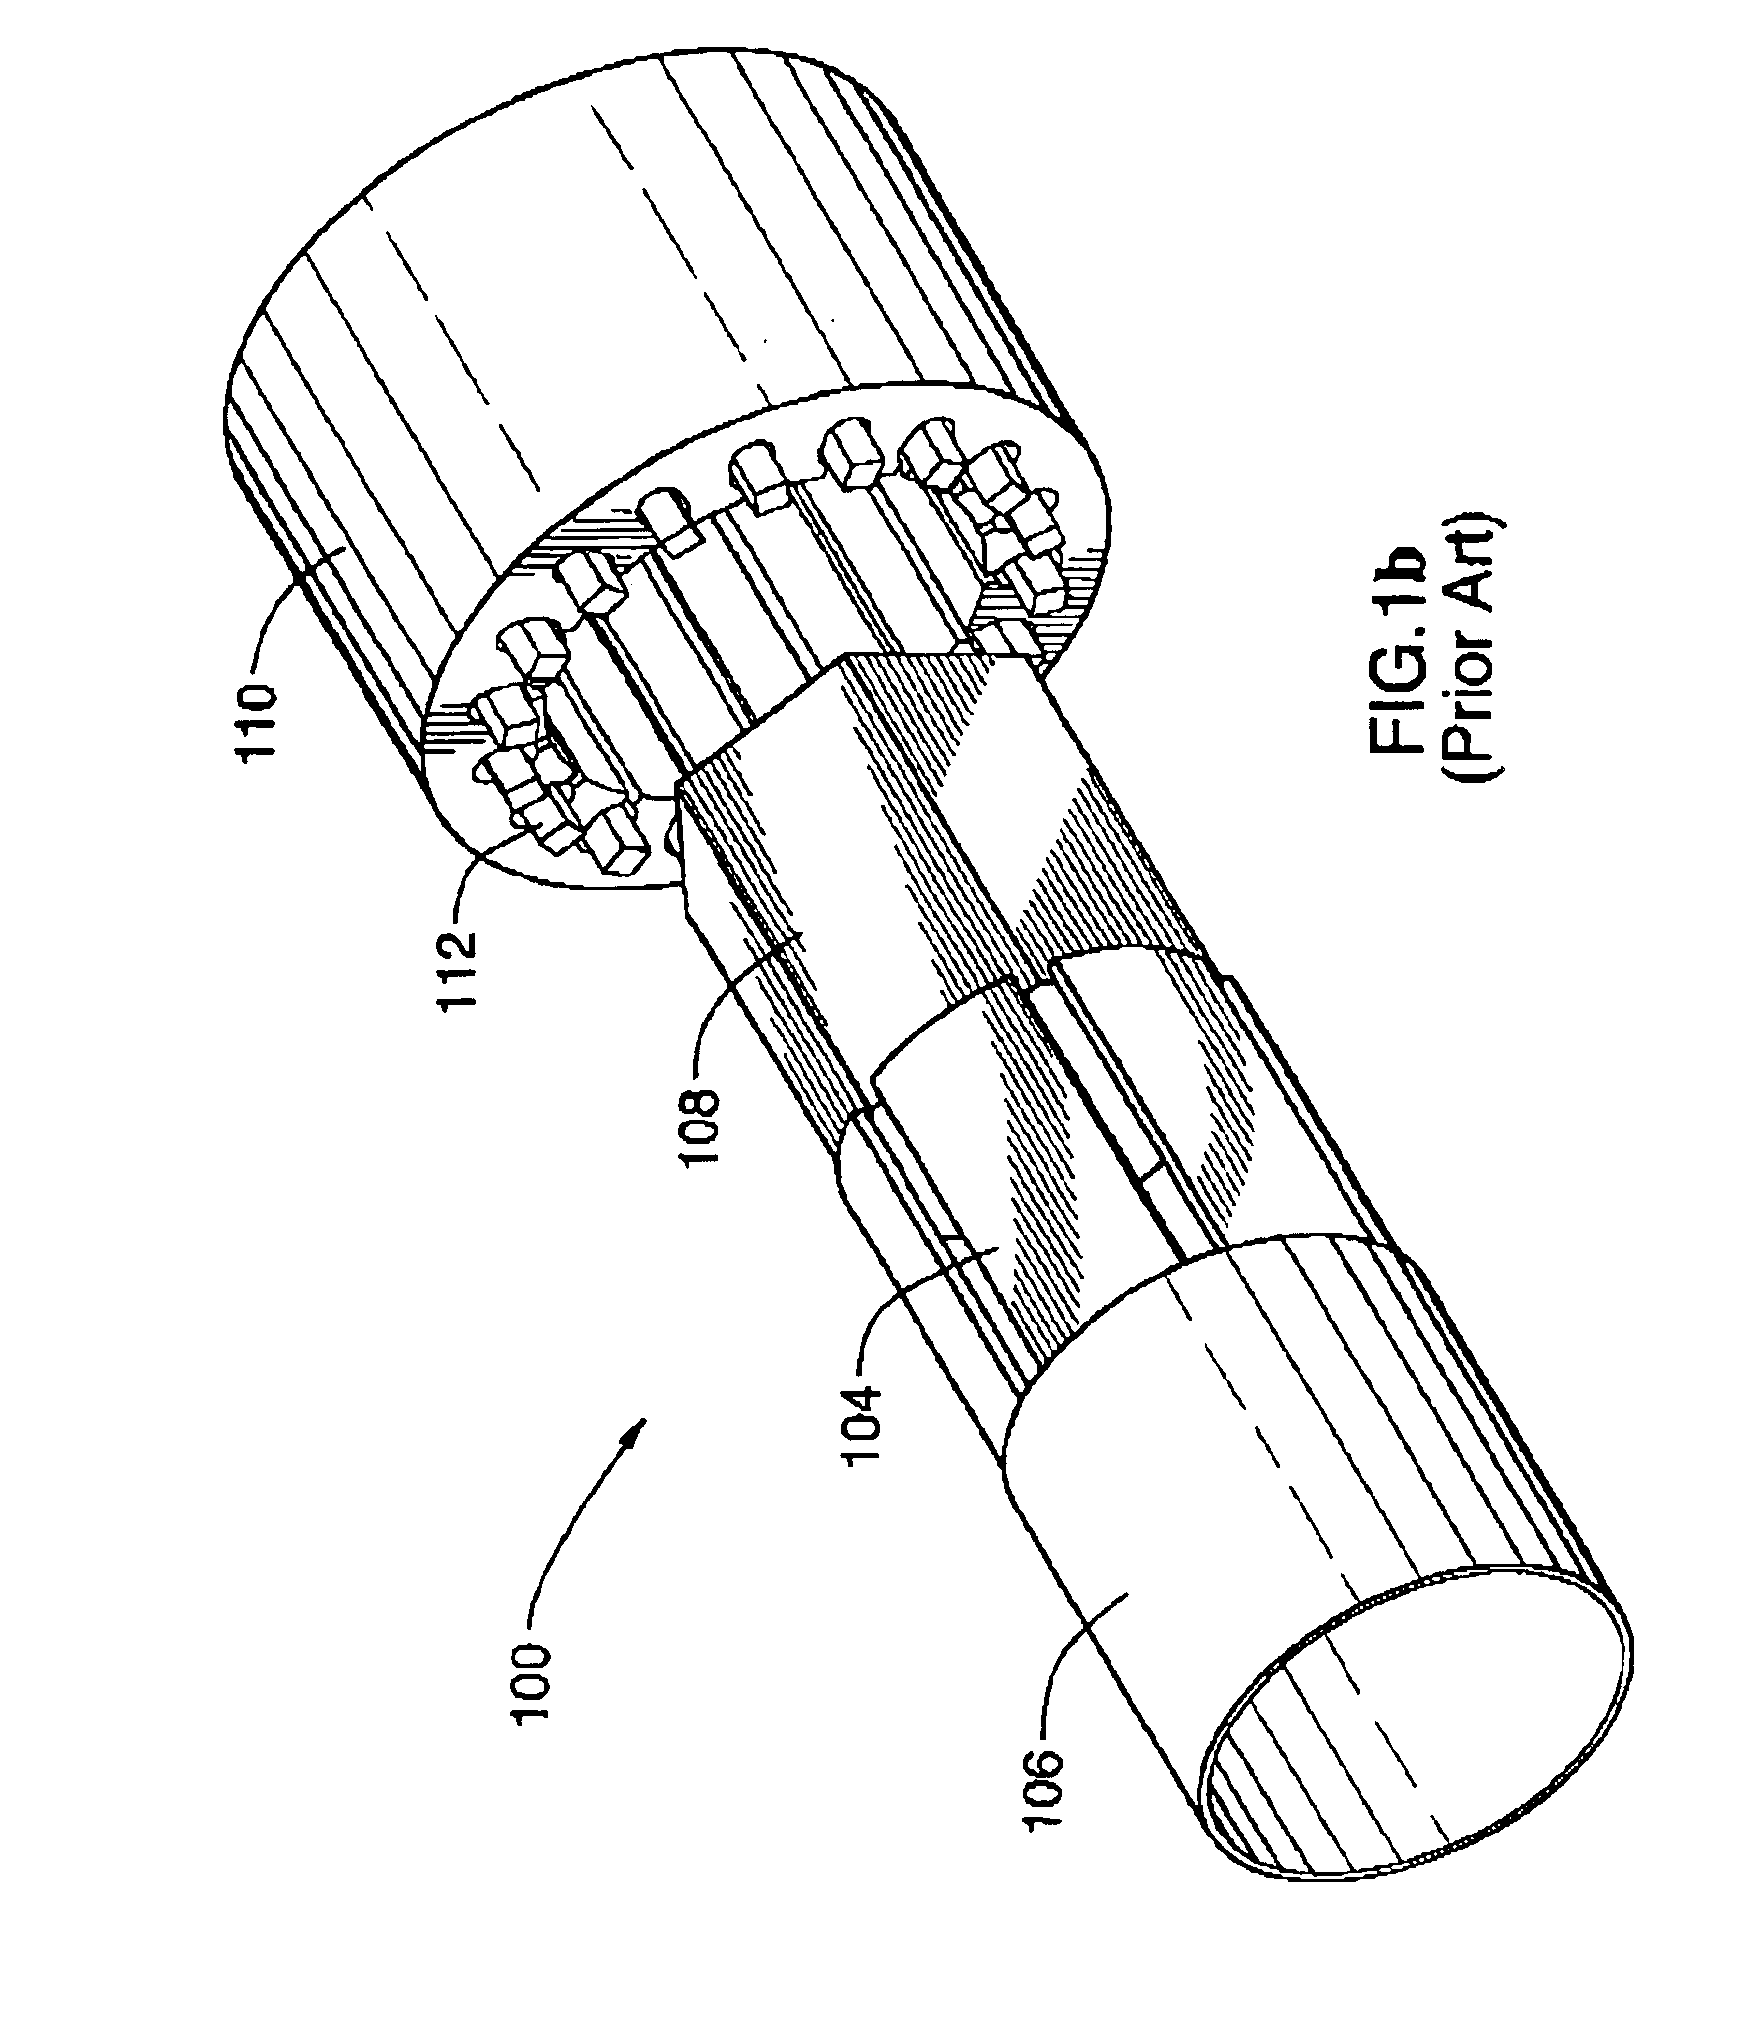 Electric machine having an integrally continuous stator winding and stator slot bridges